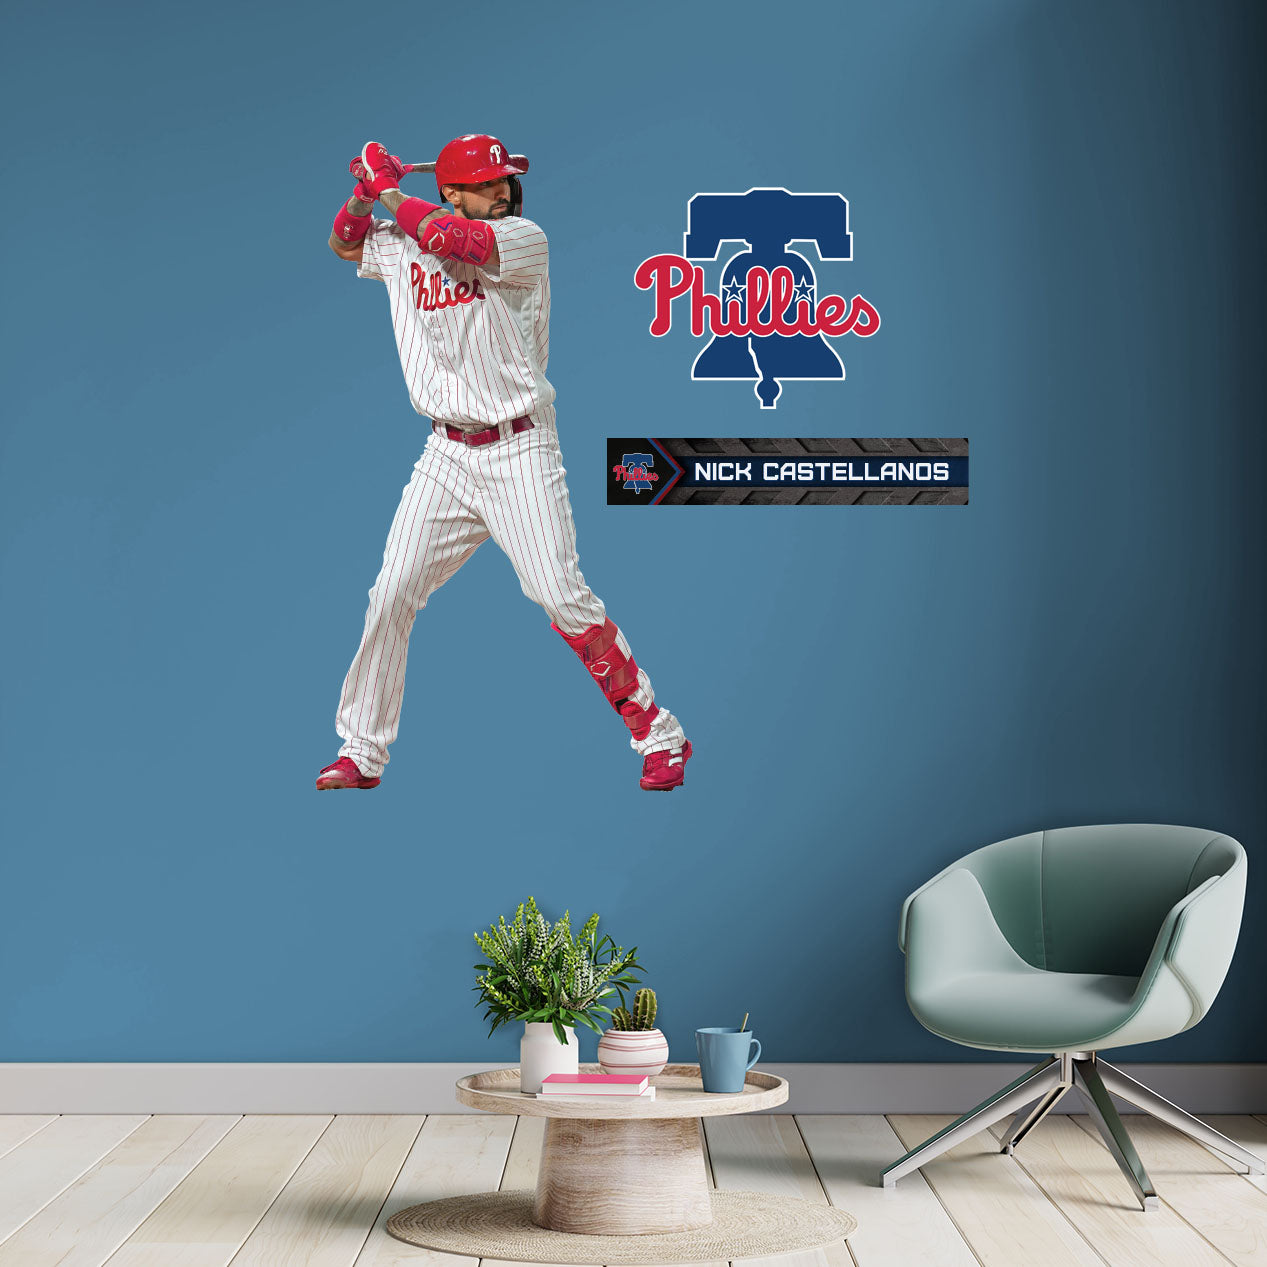 Philadelphia Phillies: Nick Castellanos - Officially Licensed MLB Removable Adhesive Decal